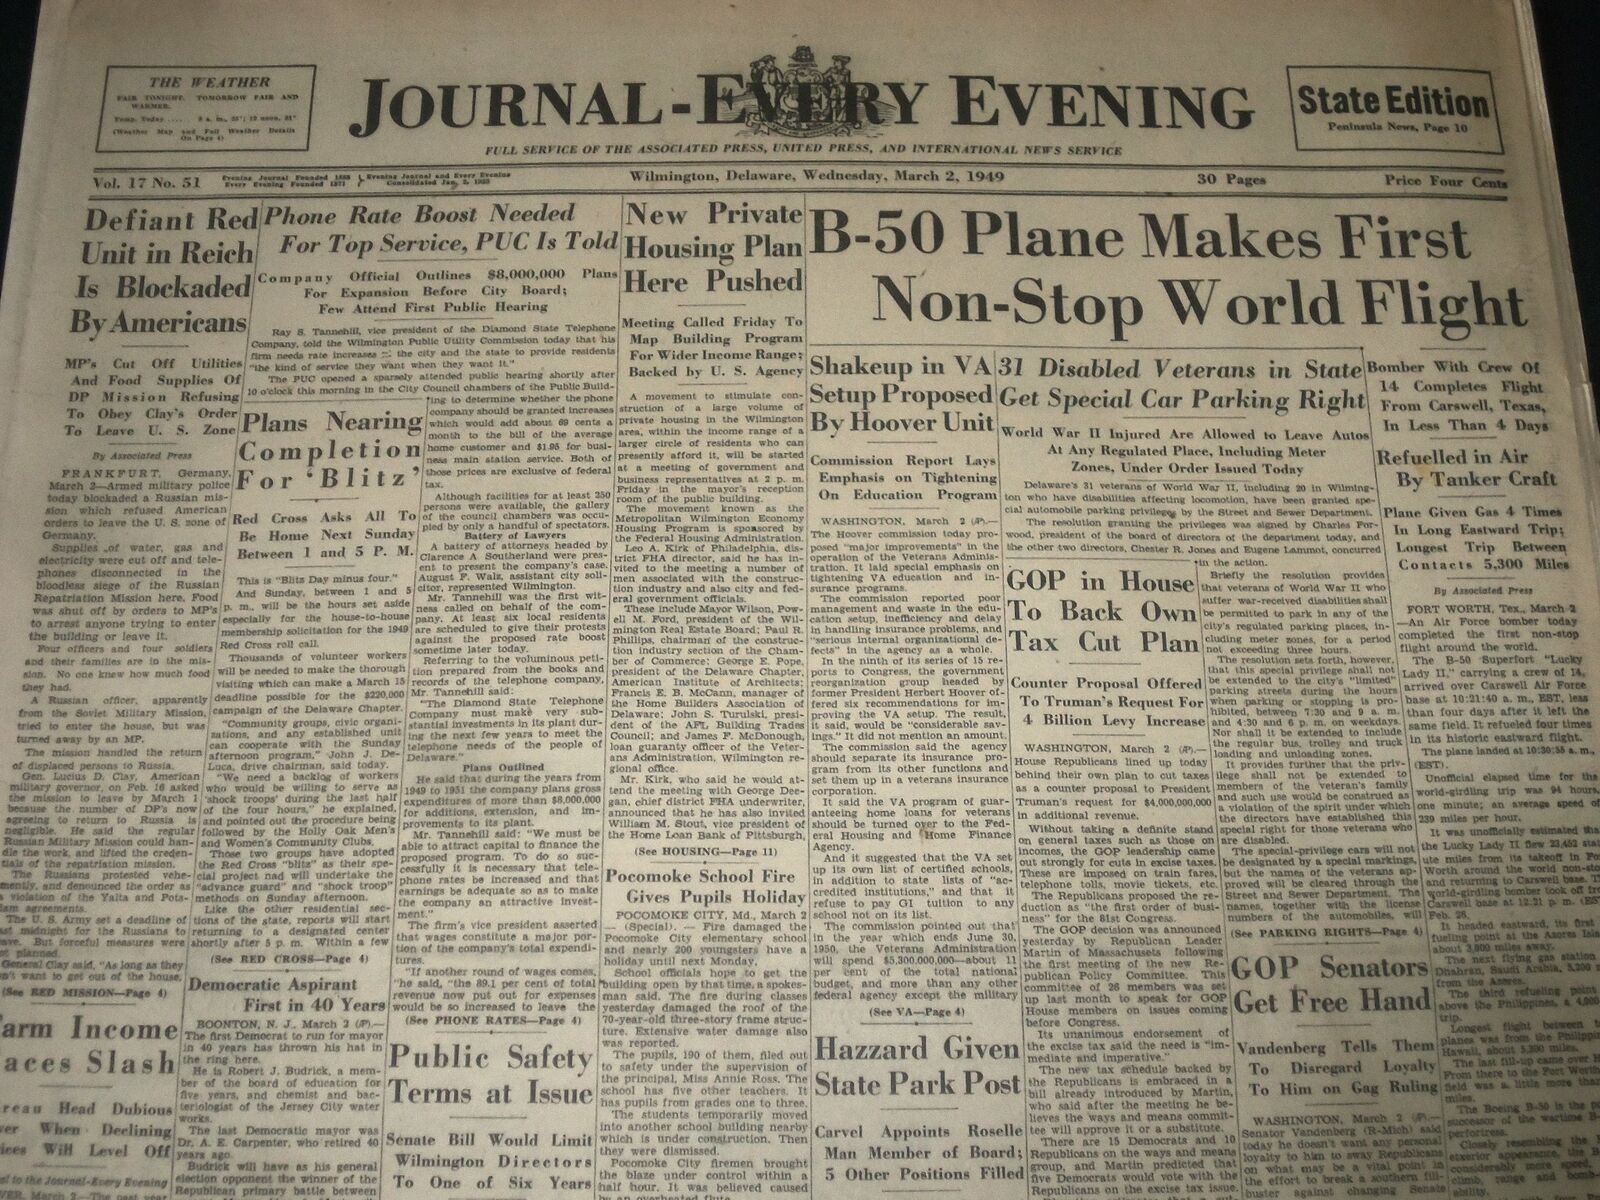 1949 MARCH 2 WILMINGTON JOURNAL B-50 PLANE MAKES FIRST NON-STOP FLIGHT- NT 7326